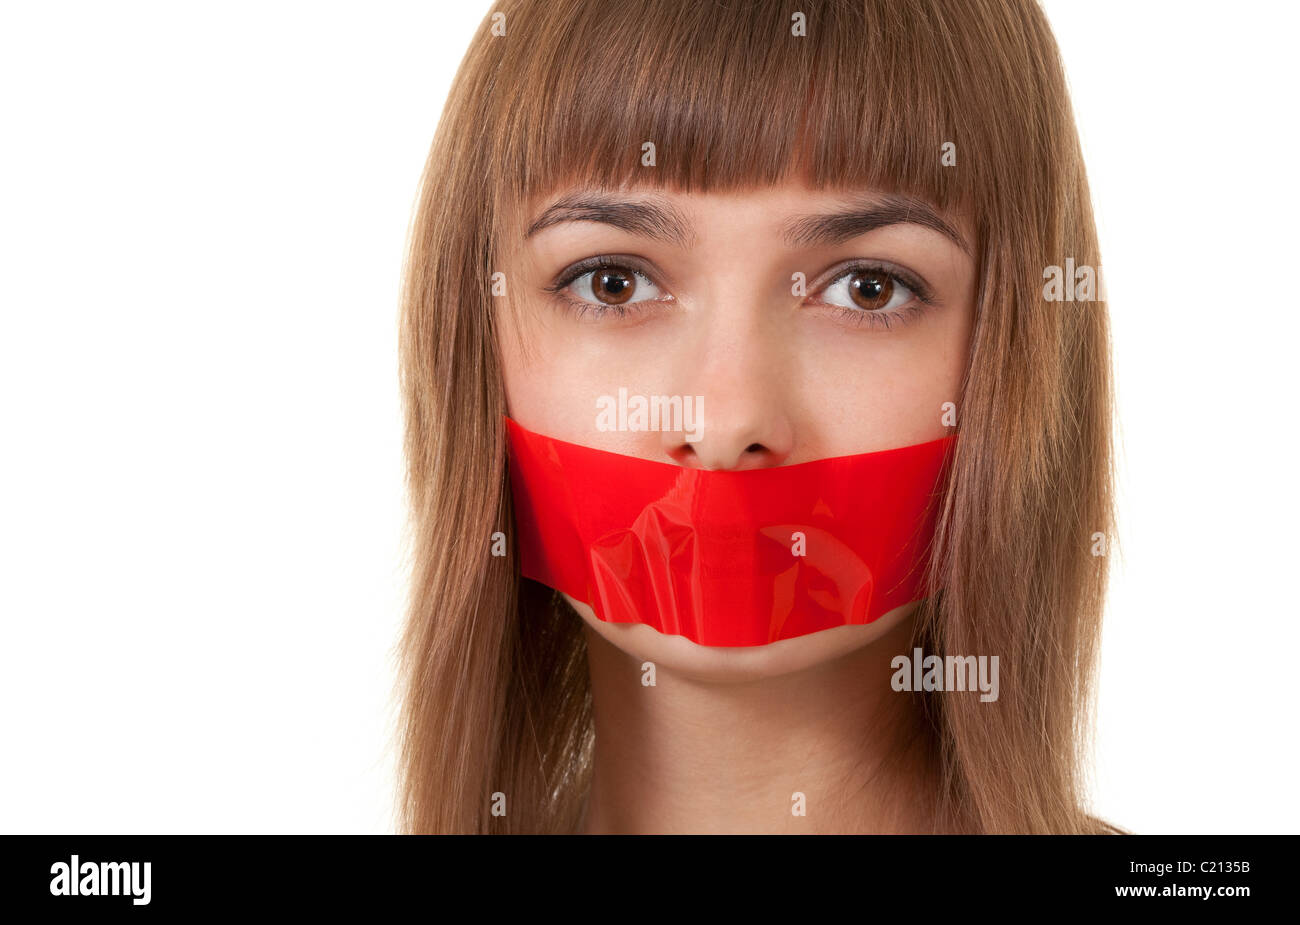 beautiful girl with her mouth sealed with red tape Stock Photo